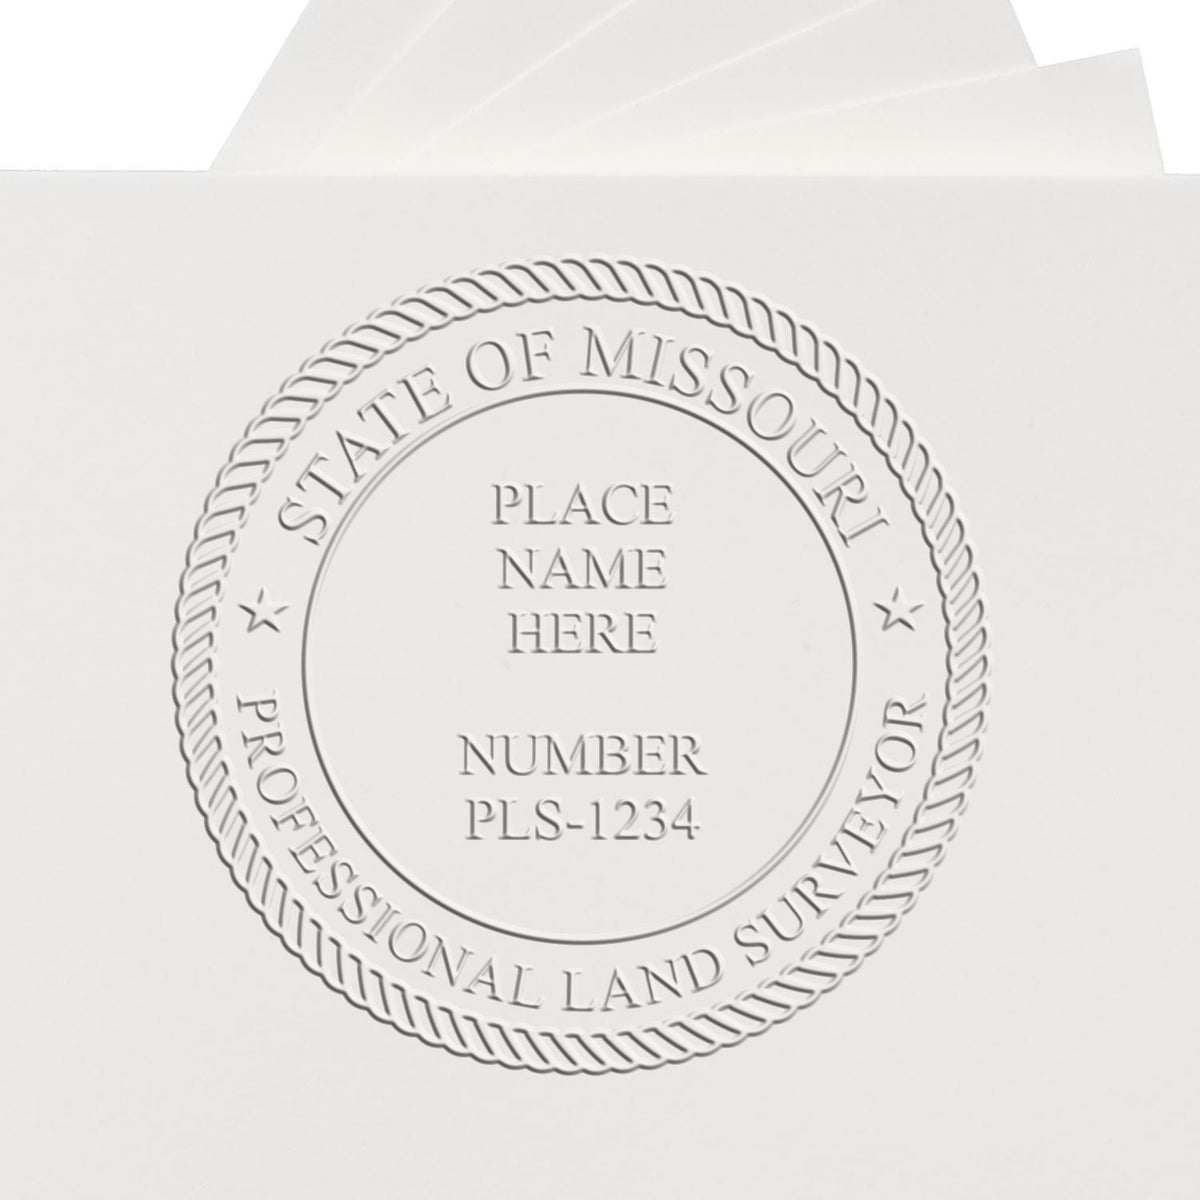 A photograph of the Hybrid Missouri Land Surveyor Seal stamp impression reveals a vivid, professional image of the on paper.